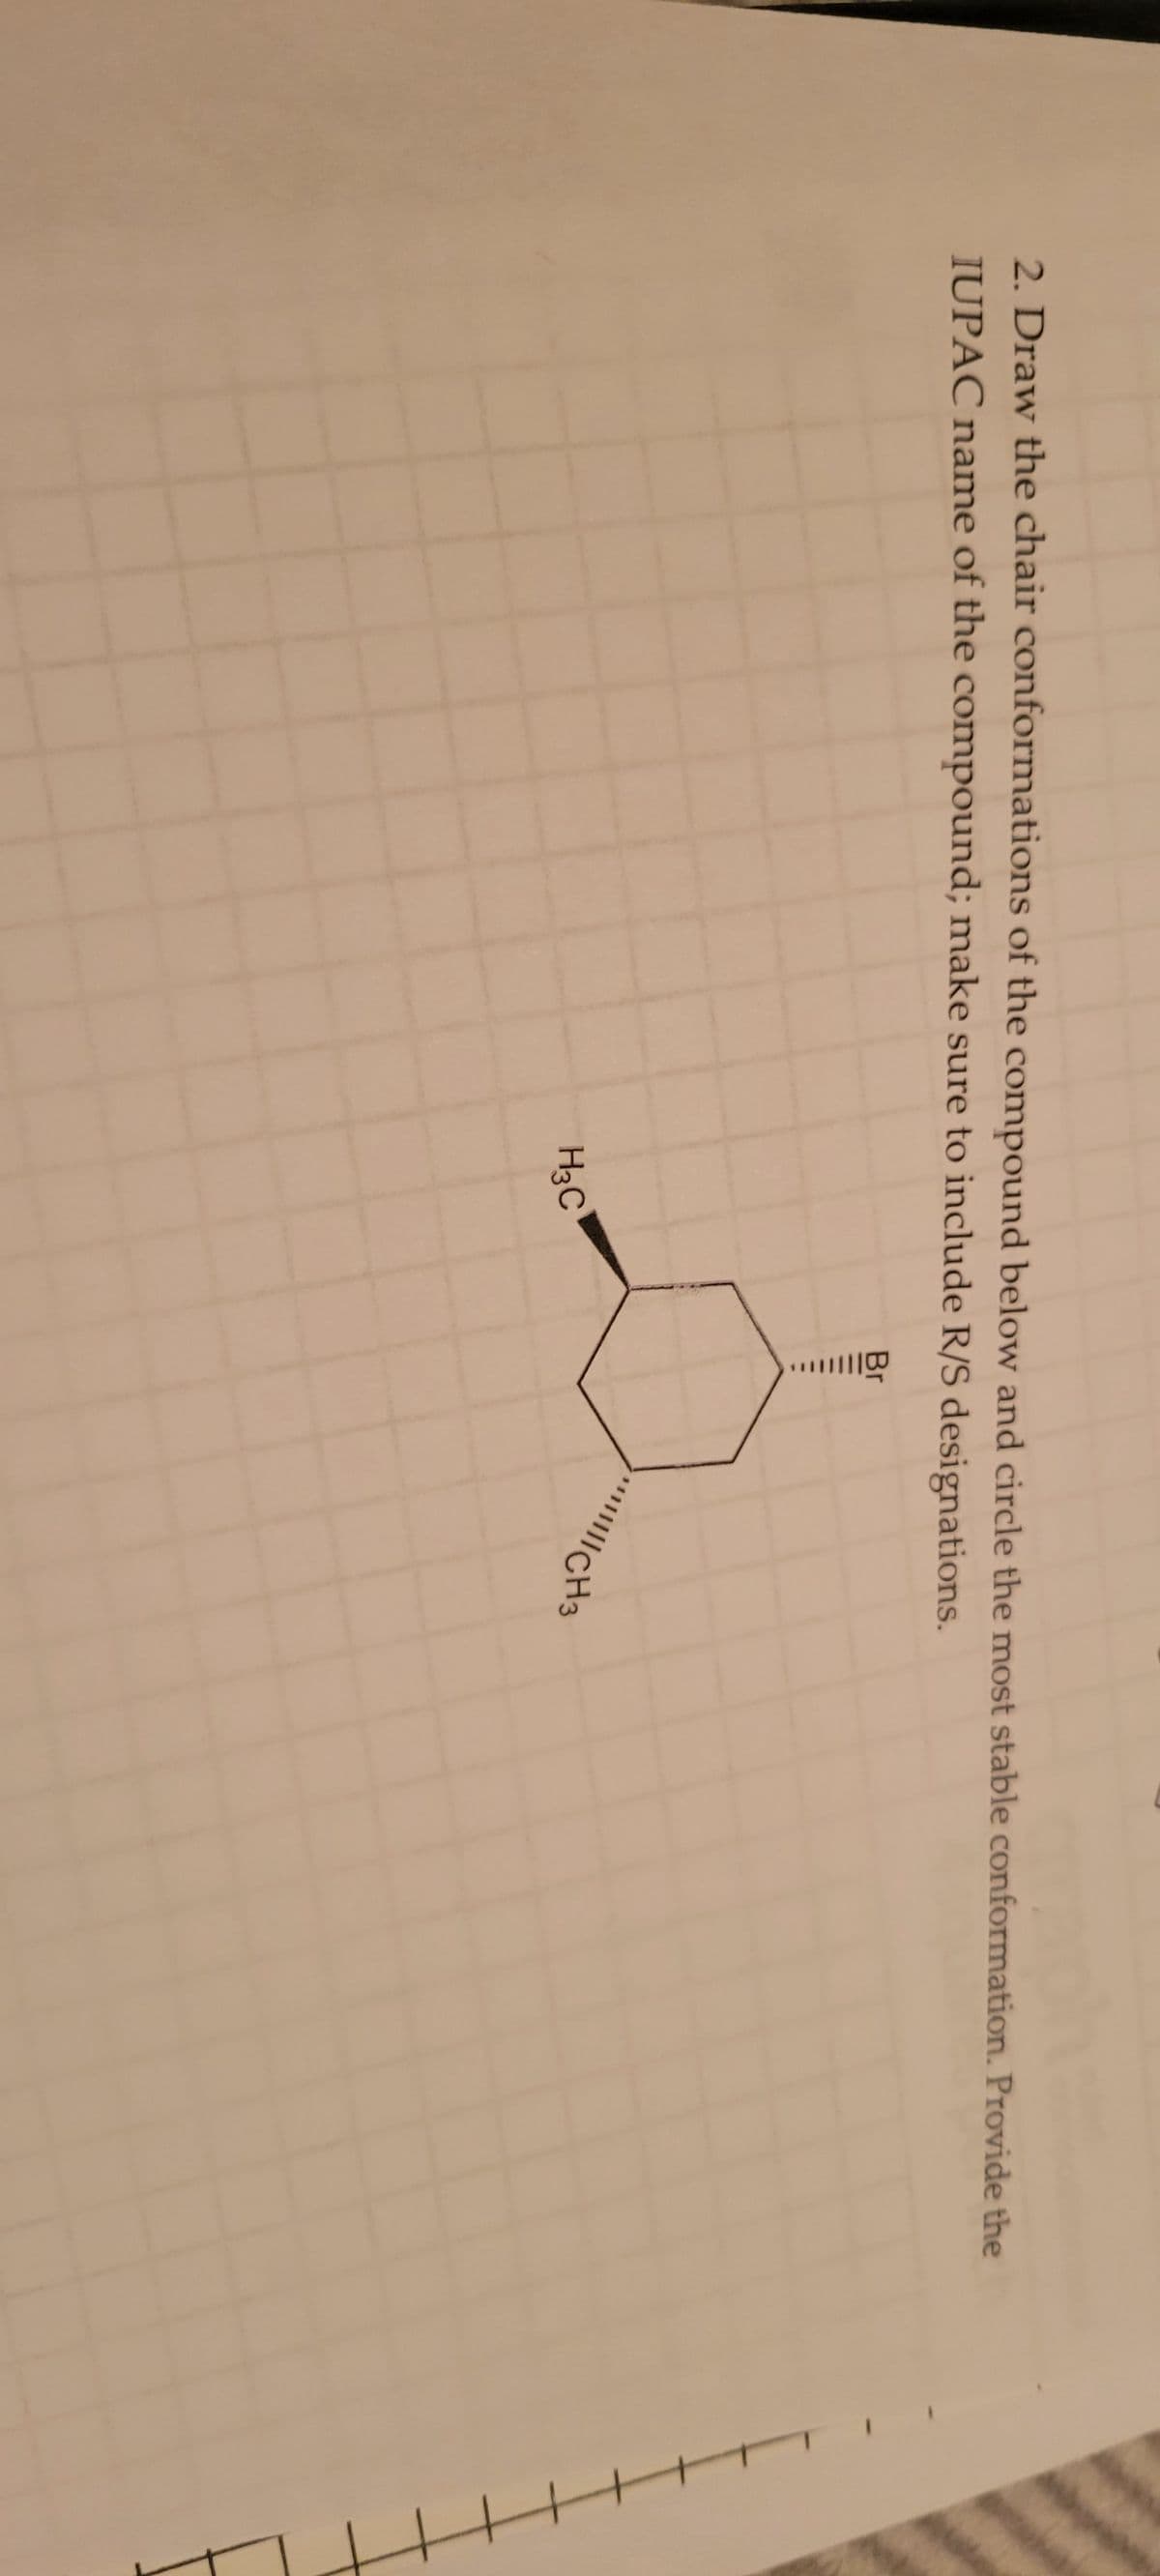 2. Draw the chair conformations of the compound below and circle the most stable conformation. Provide the
IUPAC name of the compound; make sure to include R/S designations.
H3C
|||||||CH3